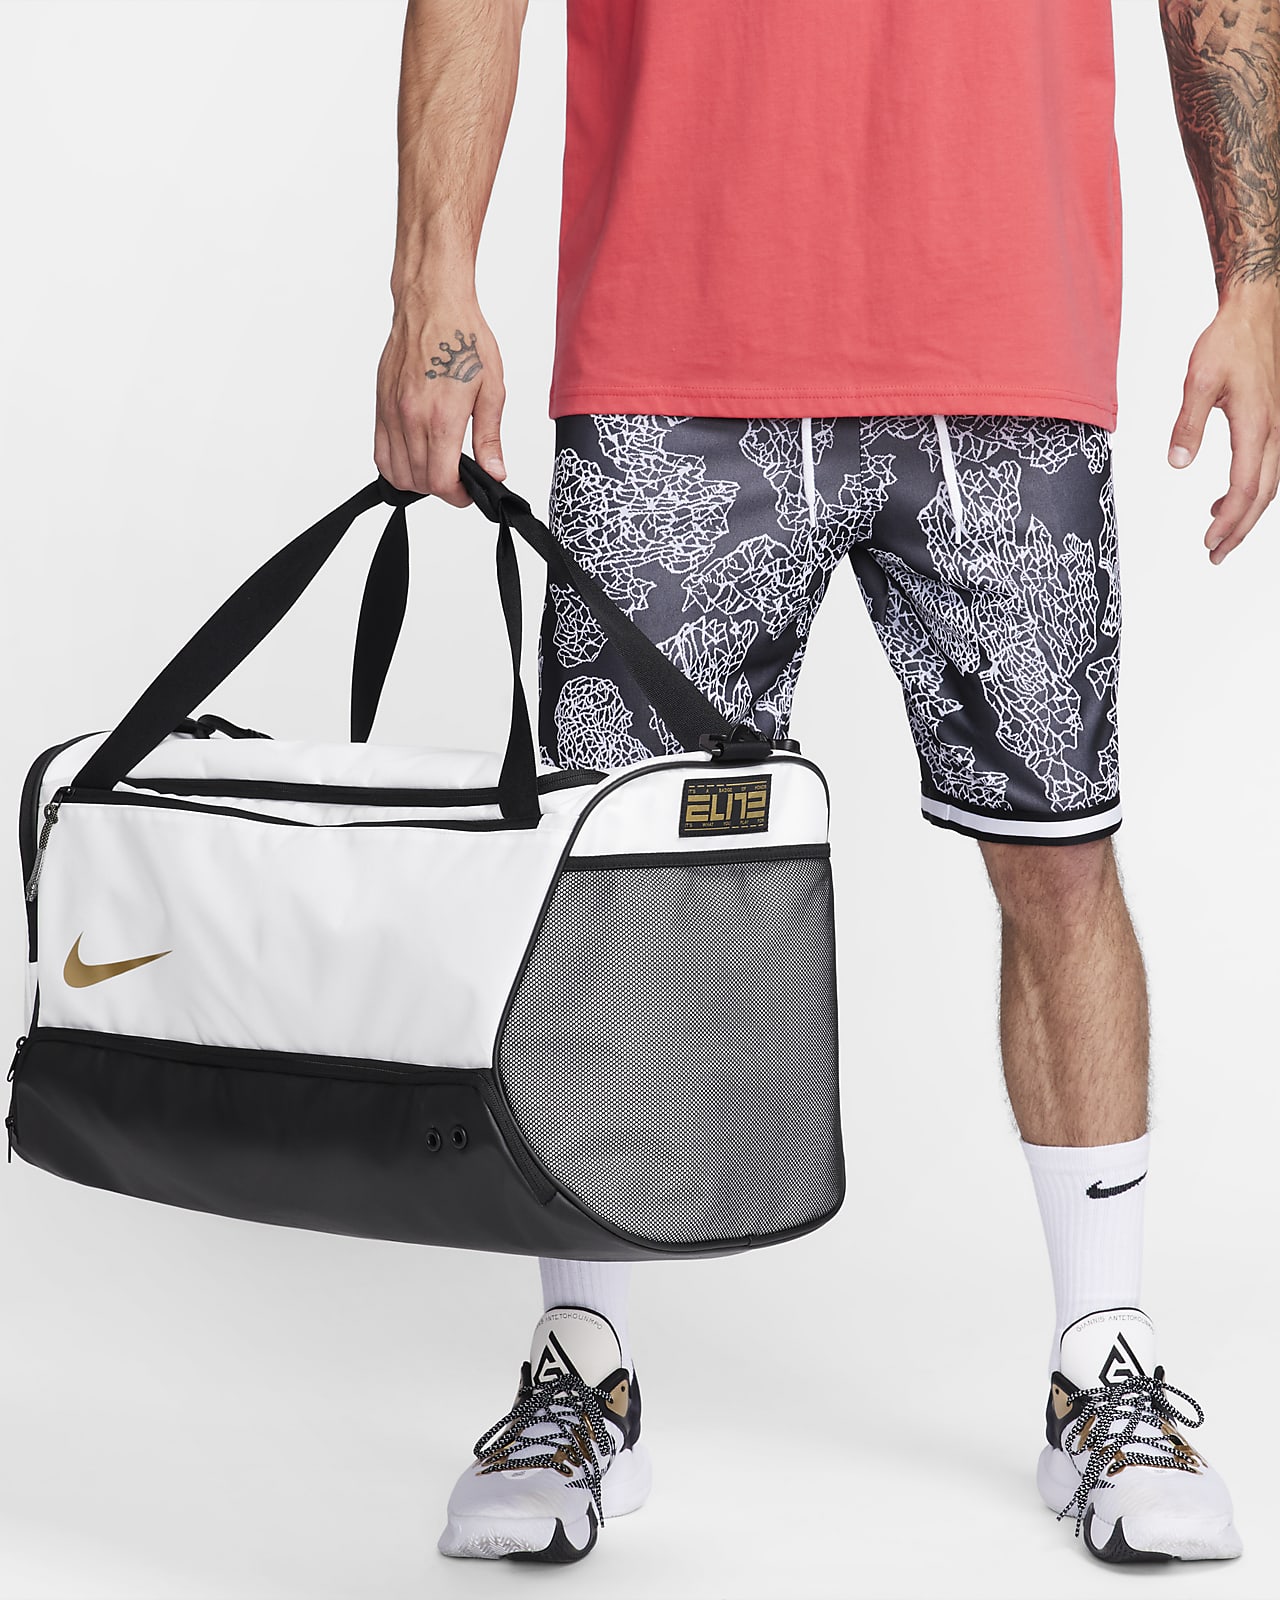 Mens Workout Accessories - Socks, Gym Bags & Hats